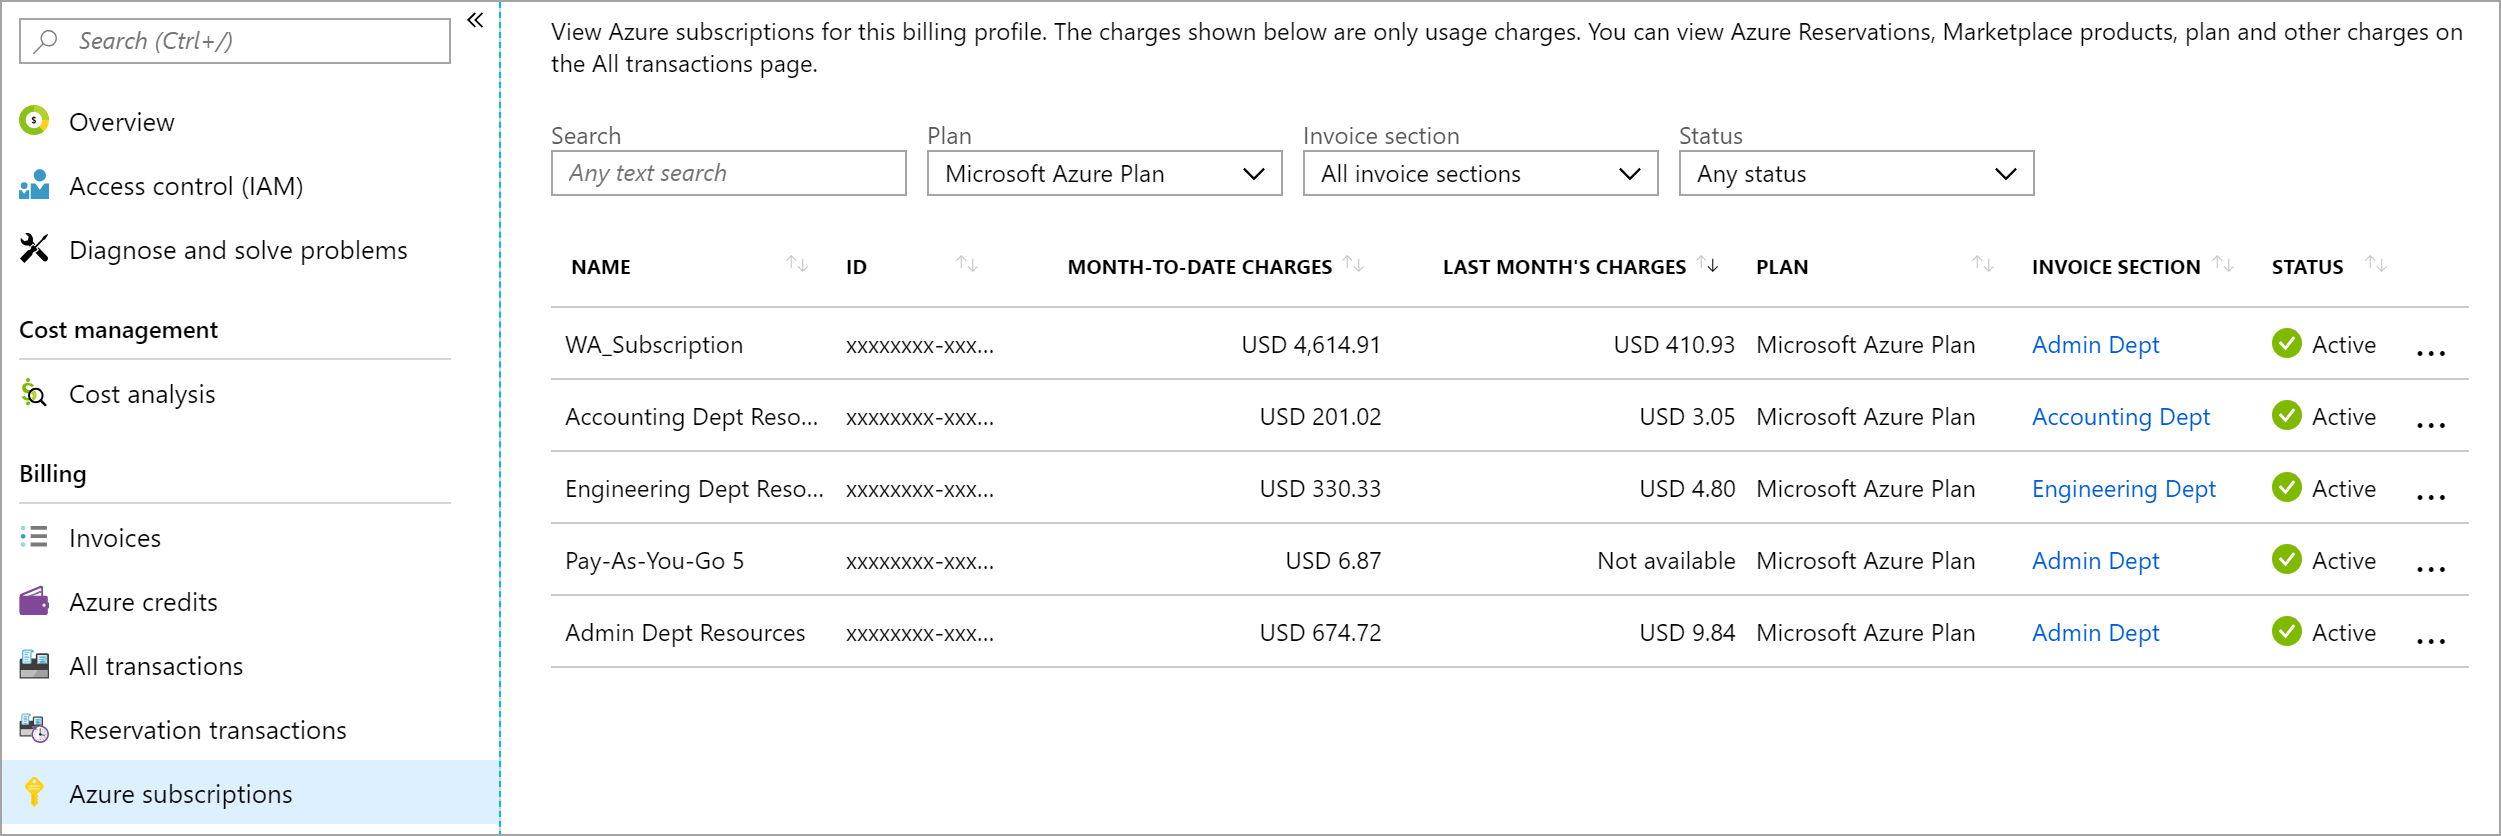 Screenshot showing subscriptions with month-to-date charges and last month's charges.